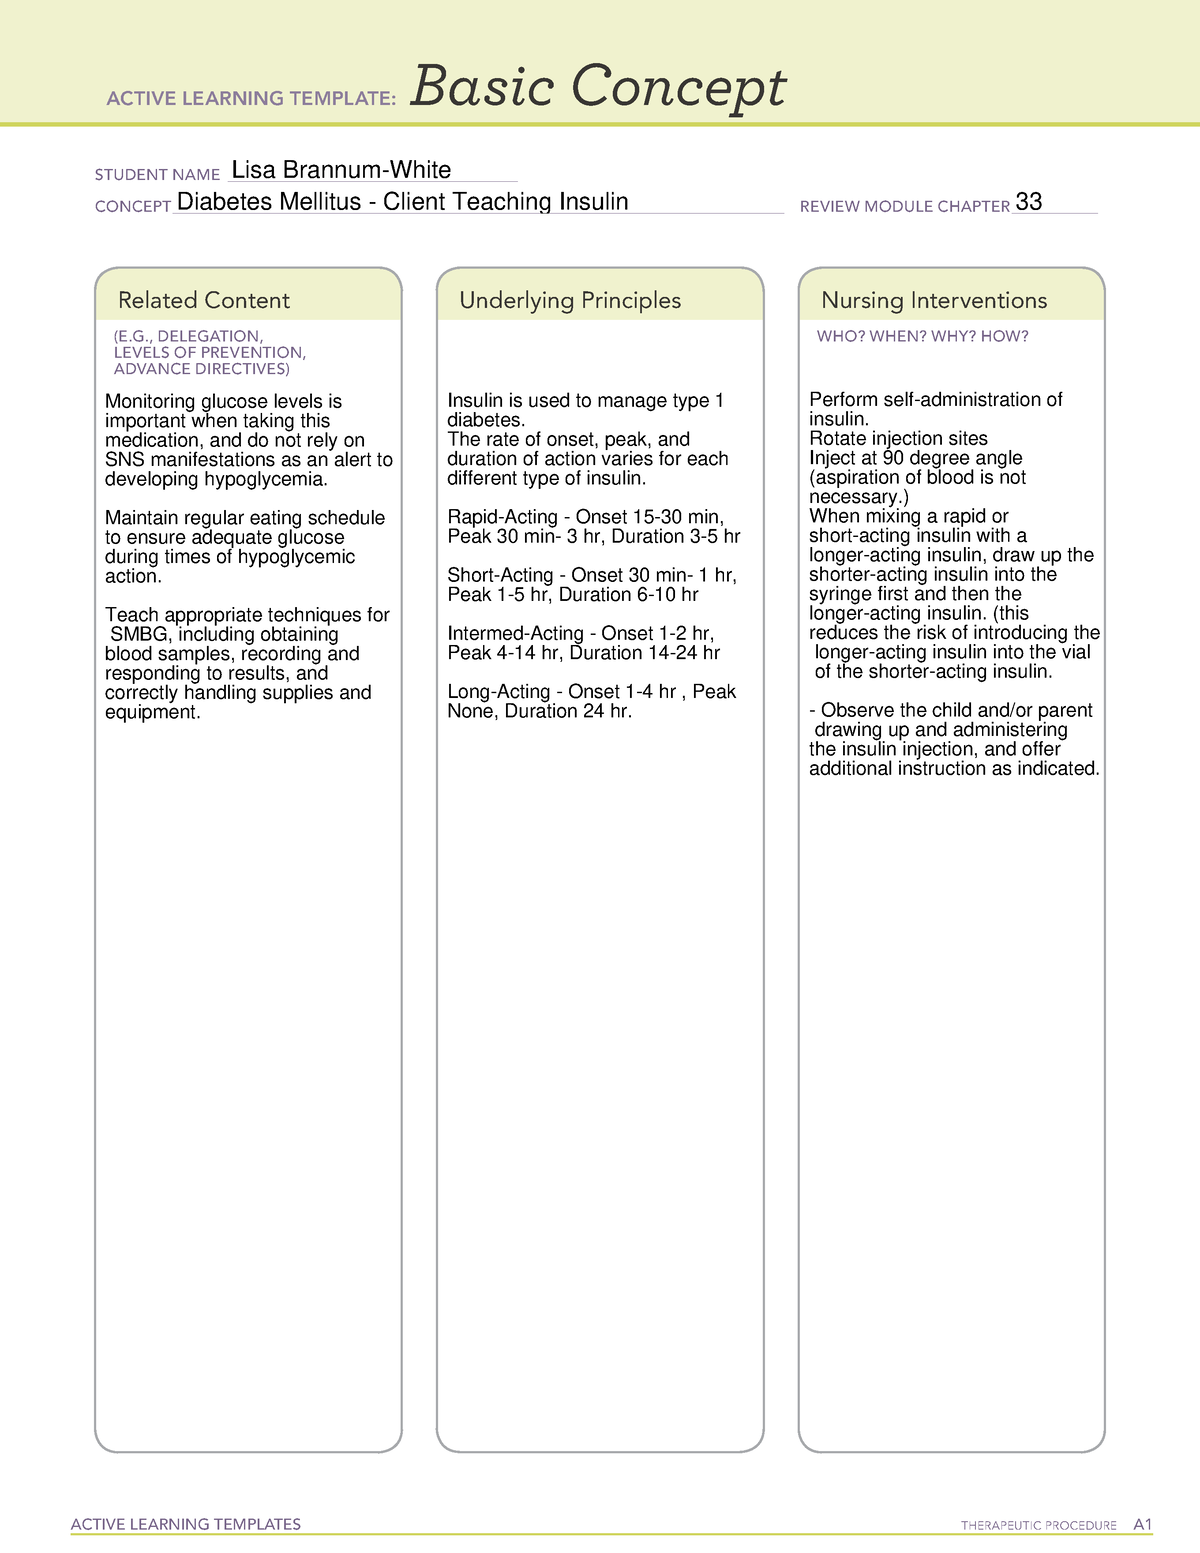 active-learning-template-basic-concept-active-learning-templates-therapeutic-procedure-a-basic